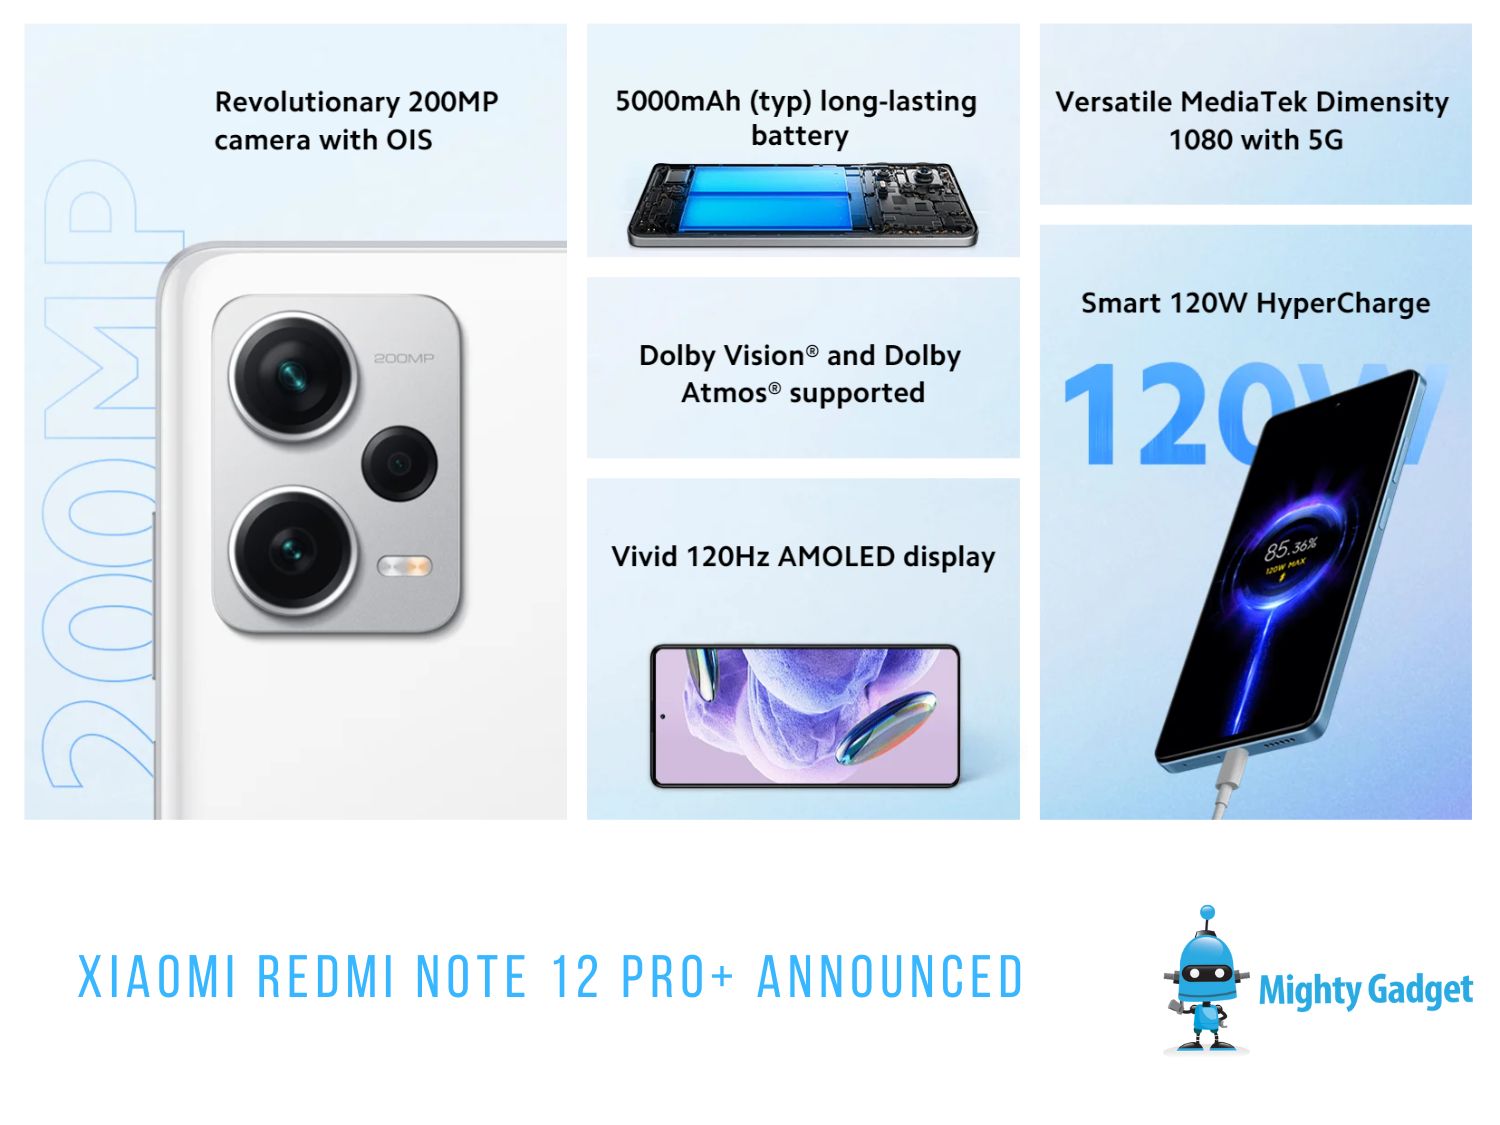 Xiaomi Redmi Note 12 Pro+ Announced for £449 with 200MP camera, 120W charging and Dimensity 1080